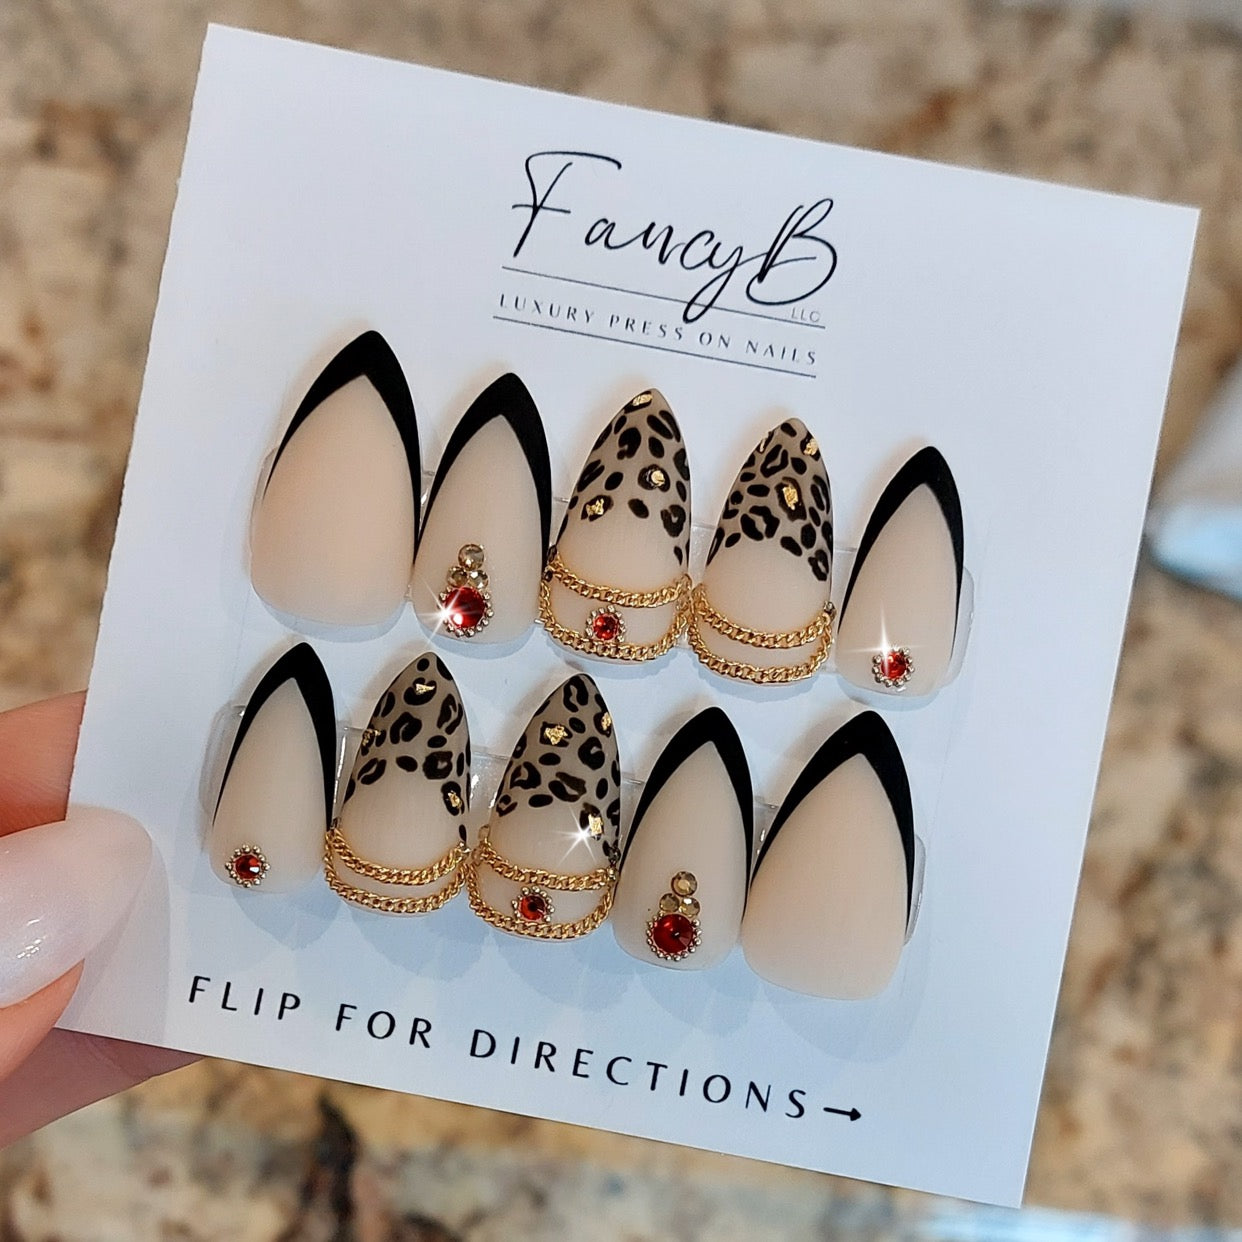 custom press on nails in sharp stiletto shape with leopard tips, gold flakes, black and neutral v-french, ruby red gems, and gold chains.